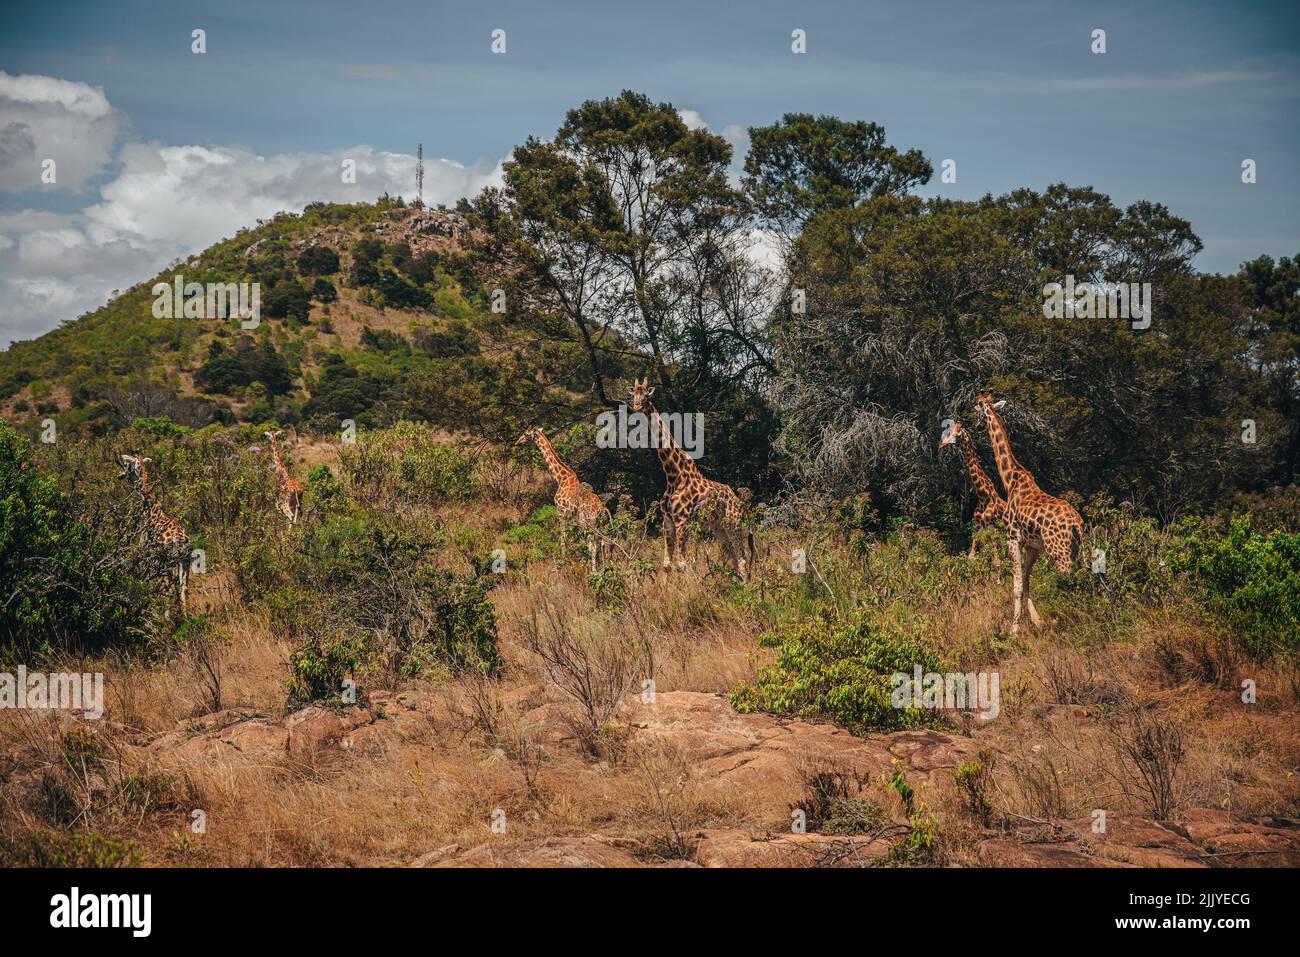 Giraffes in Africa. A group of giraffes in Kenya spend time in the wild. Africa and its fauna Stock Photo